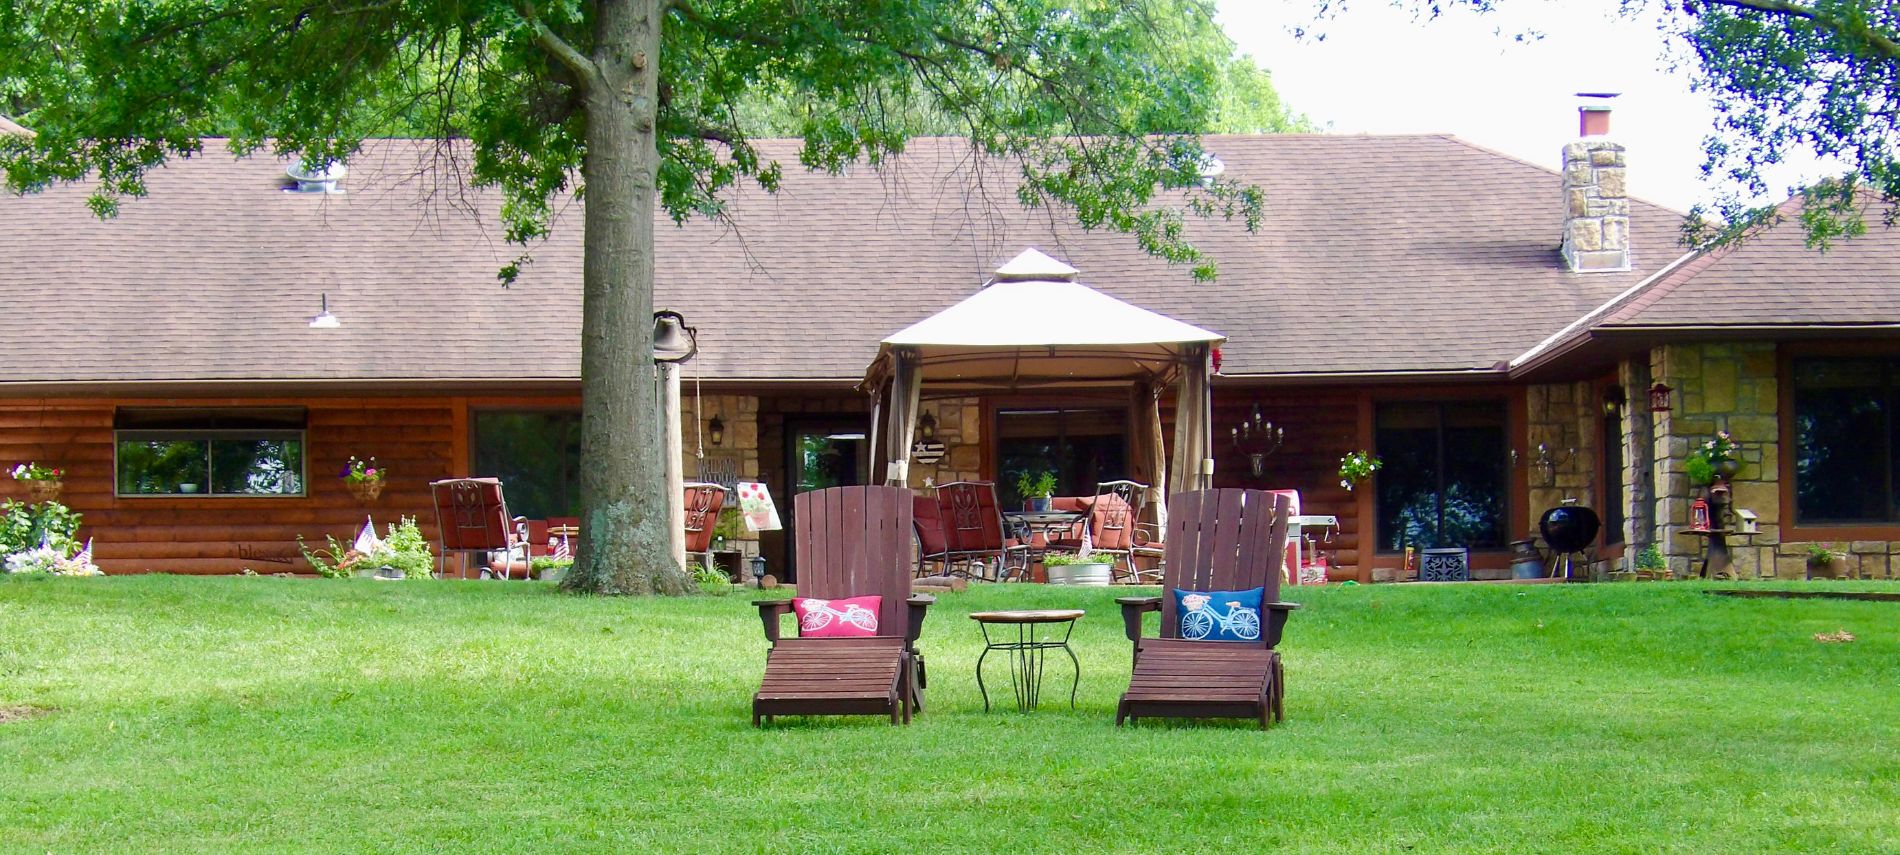 Two wooden lounge chairs on the grassy lawn overlooking two gazebos and large pond